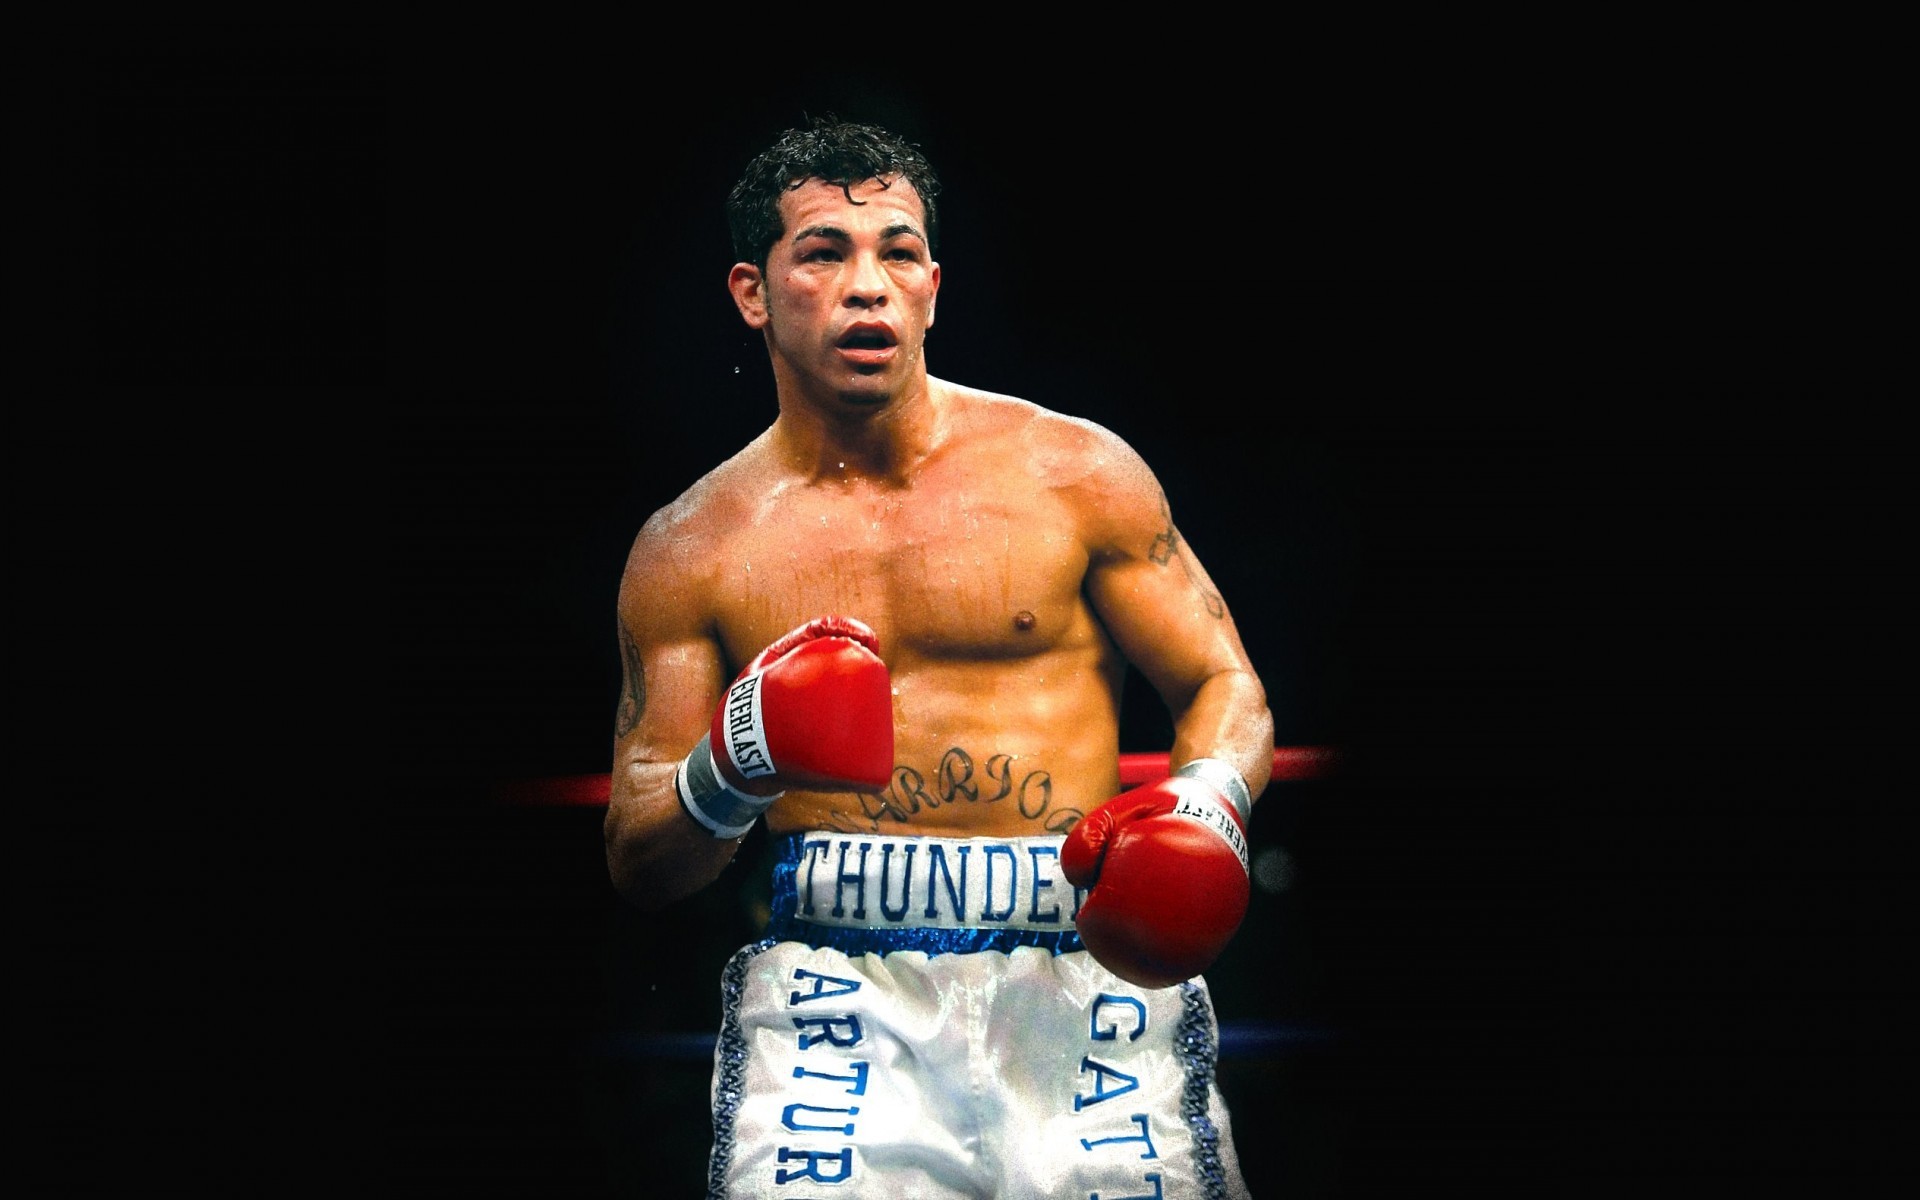 Boxing Wallpapers HD Best Boxing Sports Pictures Apps Apps 19201080 Boxing wallpapers for iphone